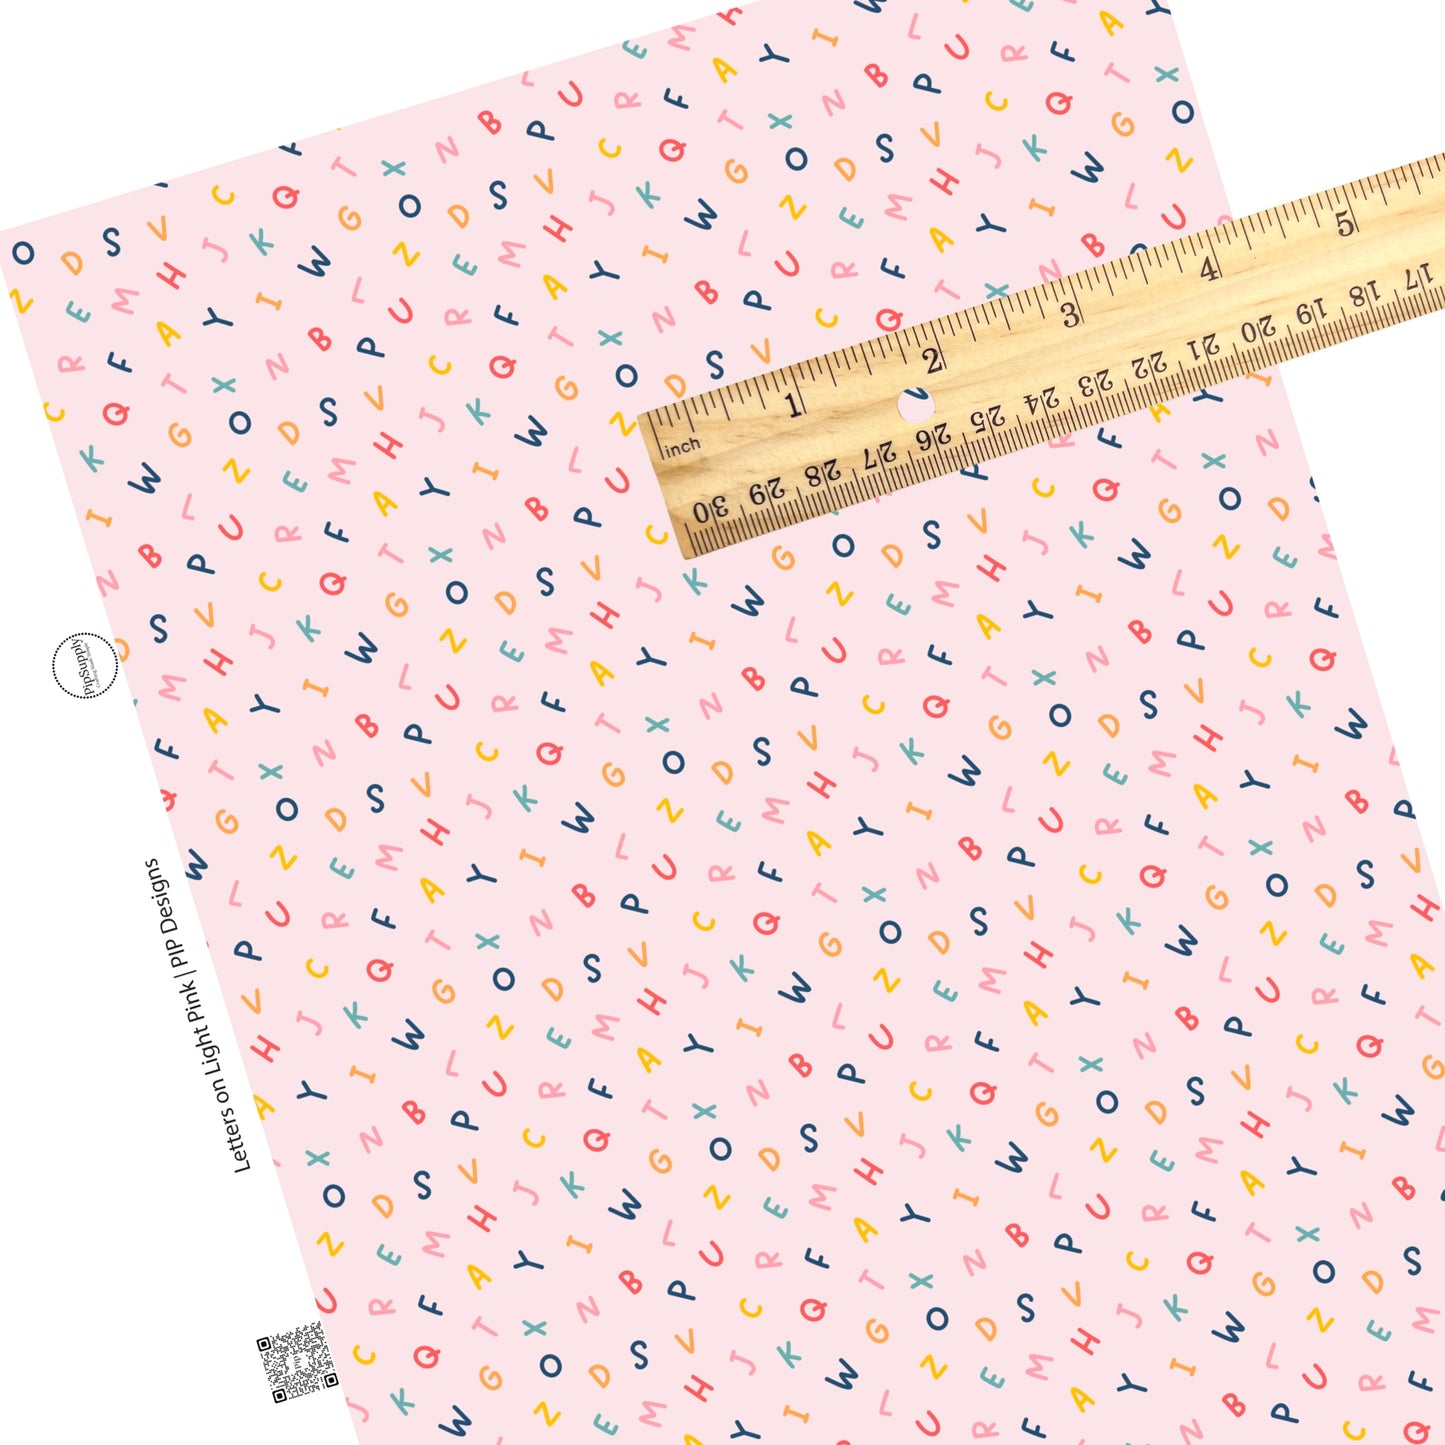 Scattered alphabet on light pink faux leather sheets